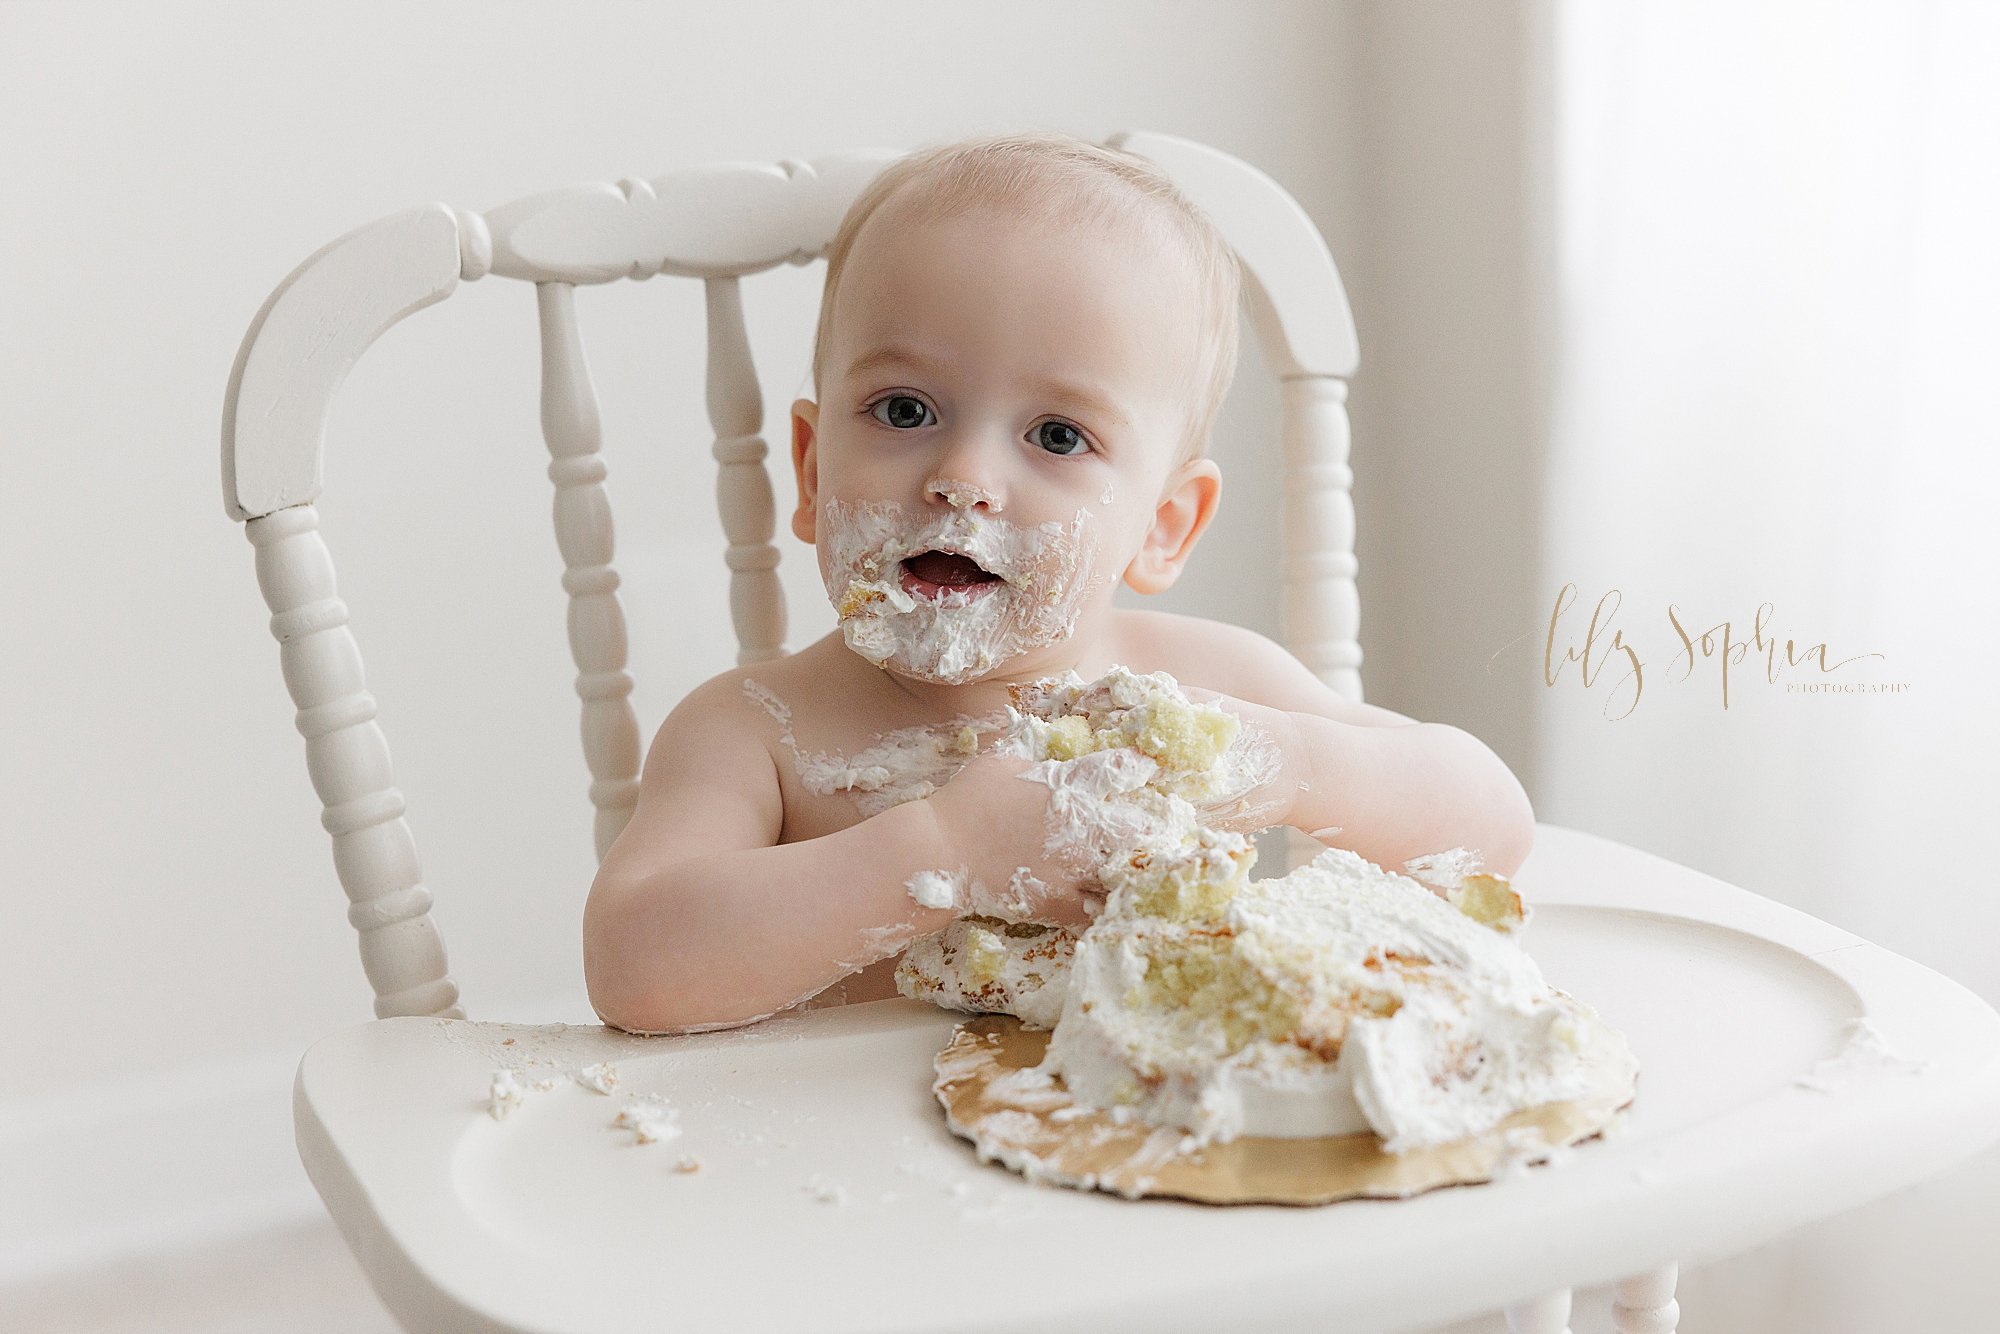  First birthday smash cake photo session with a happy one year old baby boy as he sits next to a window streaming natural light in an antique high chair with his face covered in icing, his hands clutching cake and icing, and his smash cake destroyed 